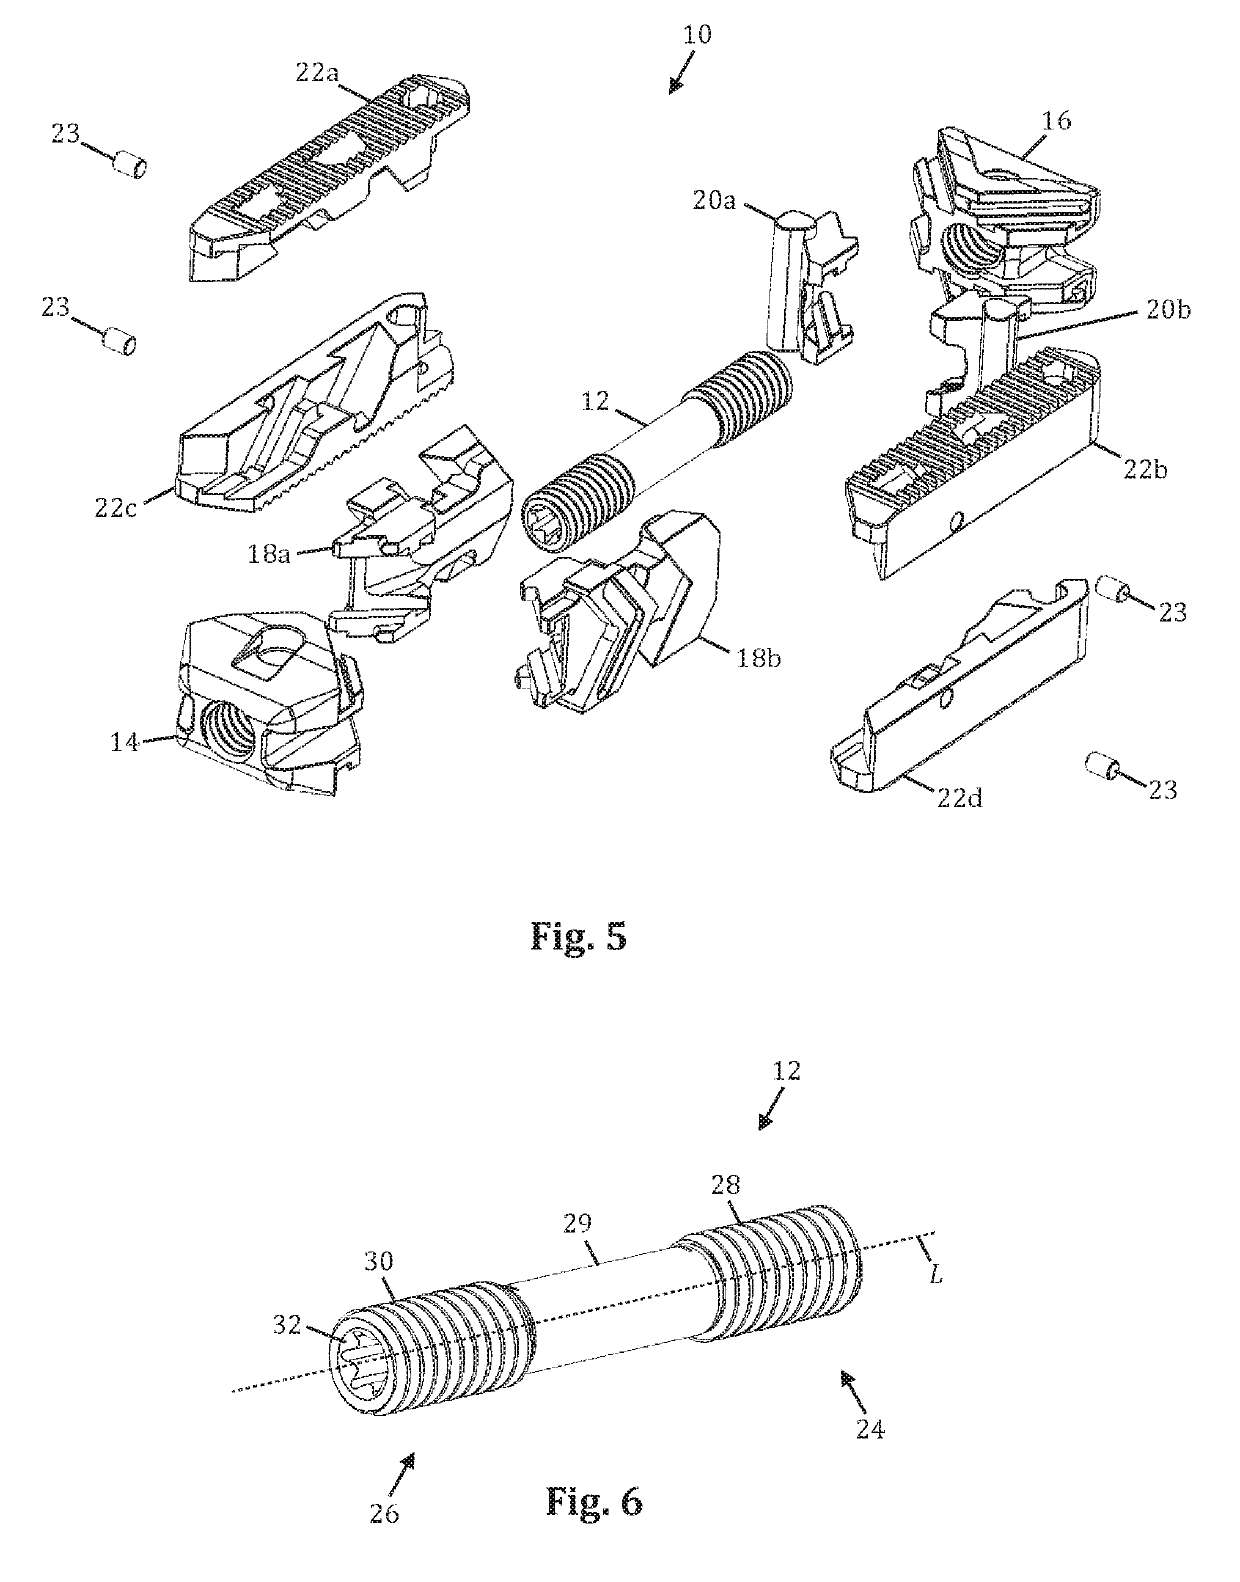 Expandable fusion device with independent expansion systems